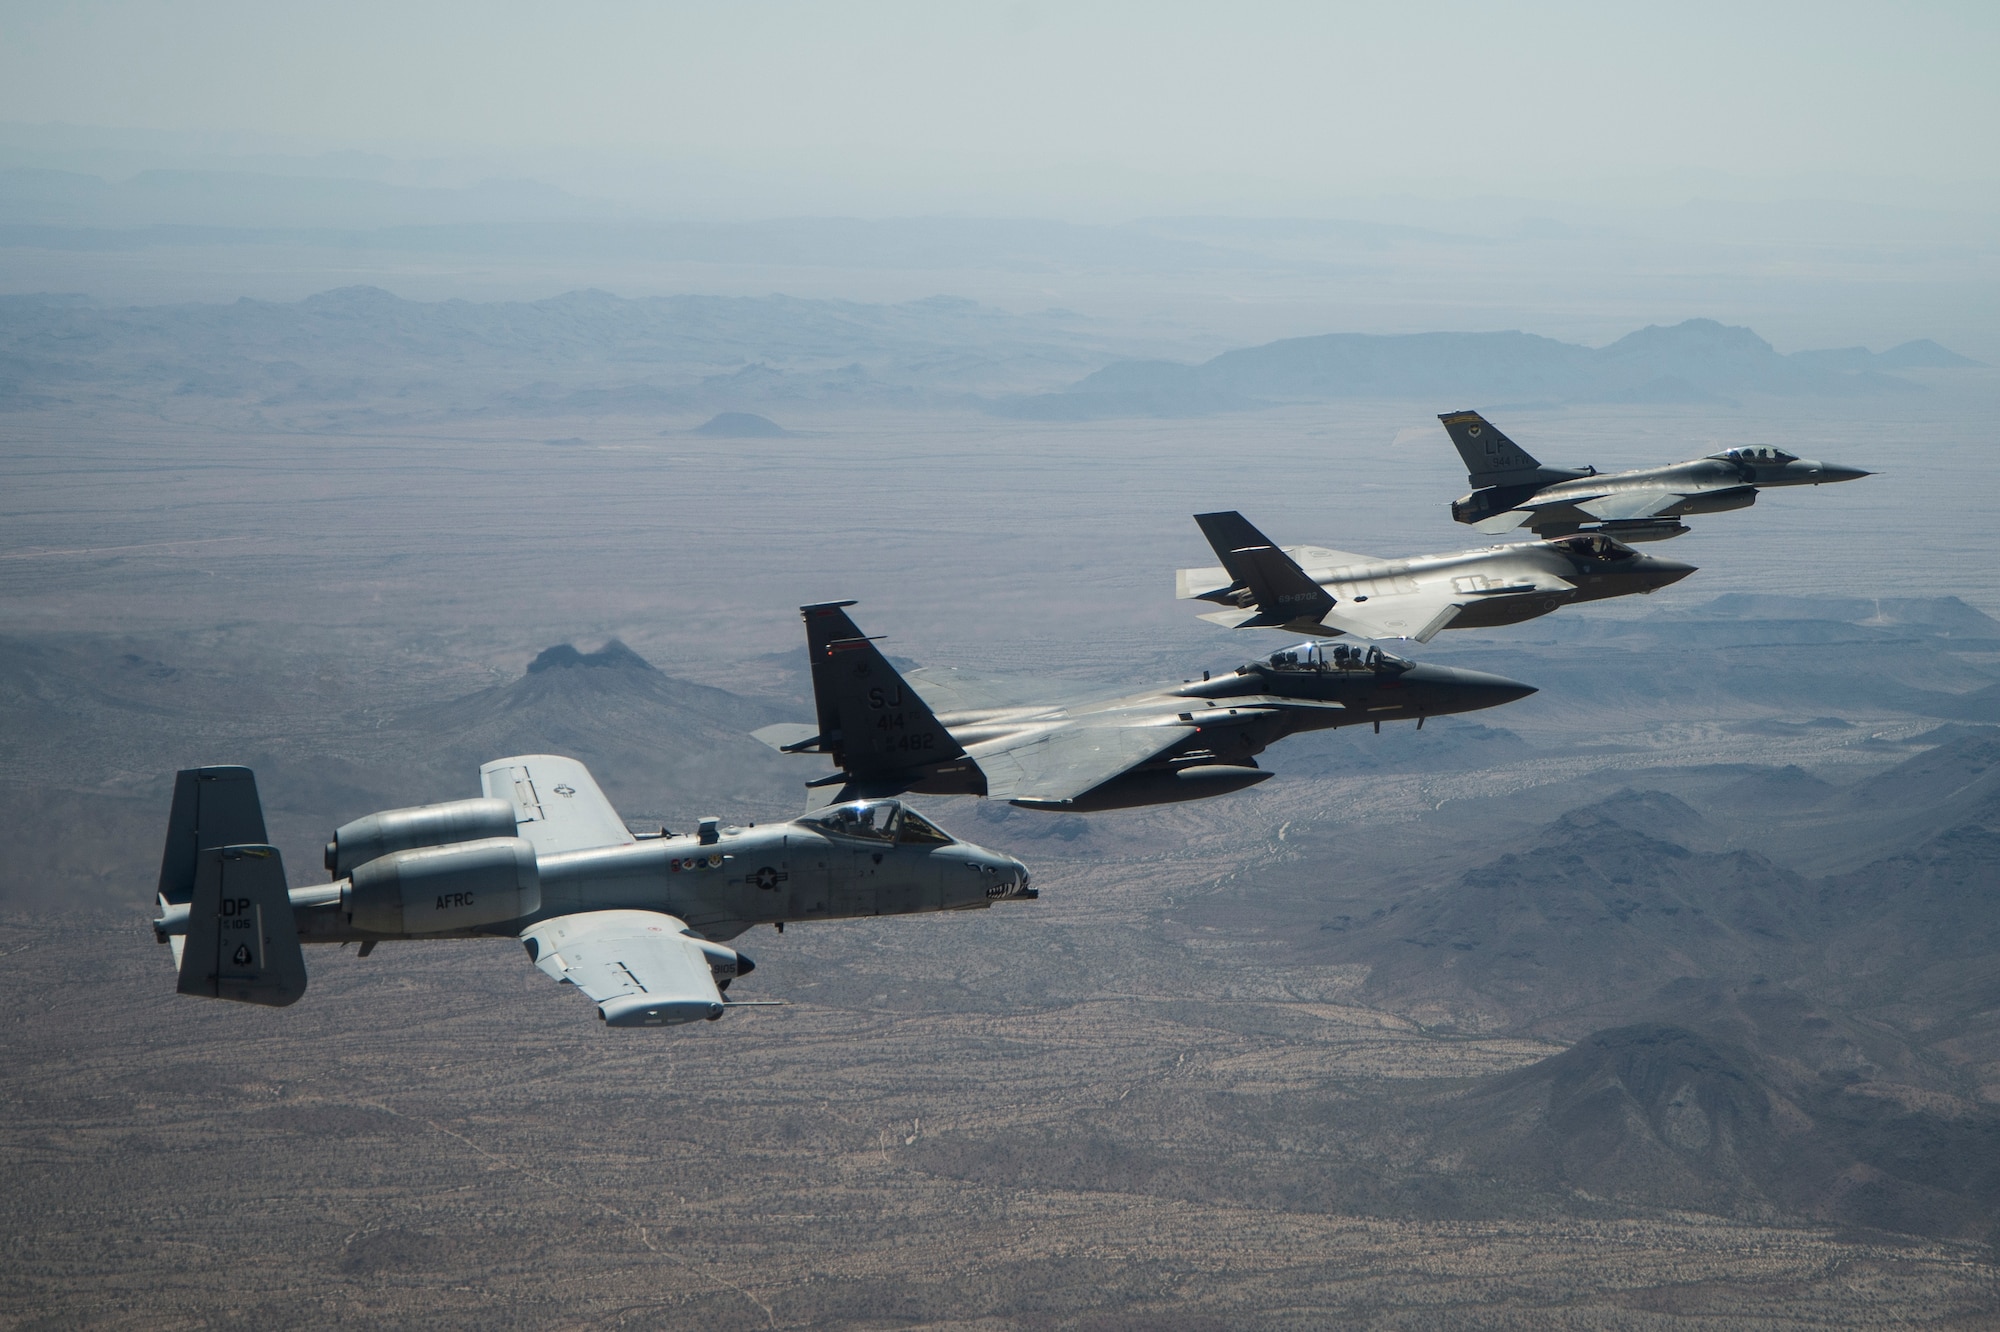 The 944th Fighter Wing, the Air Force Reserve’s largest F-16, A-10, F-15E, and F-35 training wing trains and provides combat-ready Reserve Citizen Airmen, anytime, anywhere. The wing was activated at Luke Air Force Base on July 1, 1987. The wing has since grown and now has 25 subordinate units consisting of four groups, 11 squadrons, three detachments, two flights, four operating locations, and one test center which include geographically separated units
at Davis Monthan Air Force Base, Seymour Johnson Air Force Base, Holloman Air Force Base, and Eglin Air Force Base.

The 944th Fighter Wing is tasked to support worldwide mobility and combat employment operations in conjunction with supporting the Air Education and Training Command, and Air Combat Command mission to train F-16, F-15E, F-35, and A-10 pilots for the United States Air Force, Air Force Reserve, Air National Guard and other participating nations.